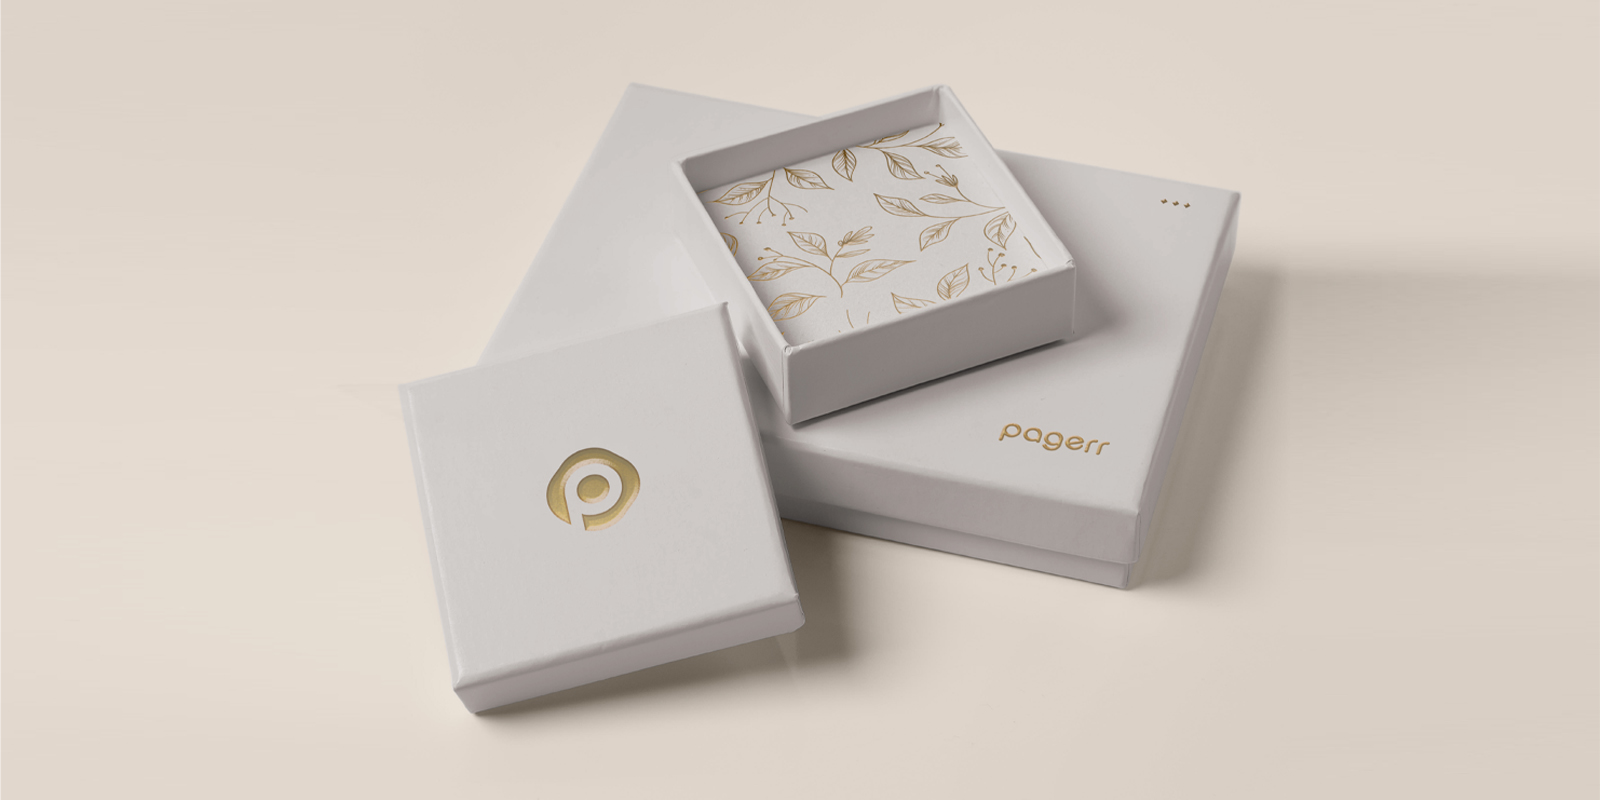 Product boxes in Brussels - Print with Pagerr